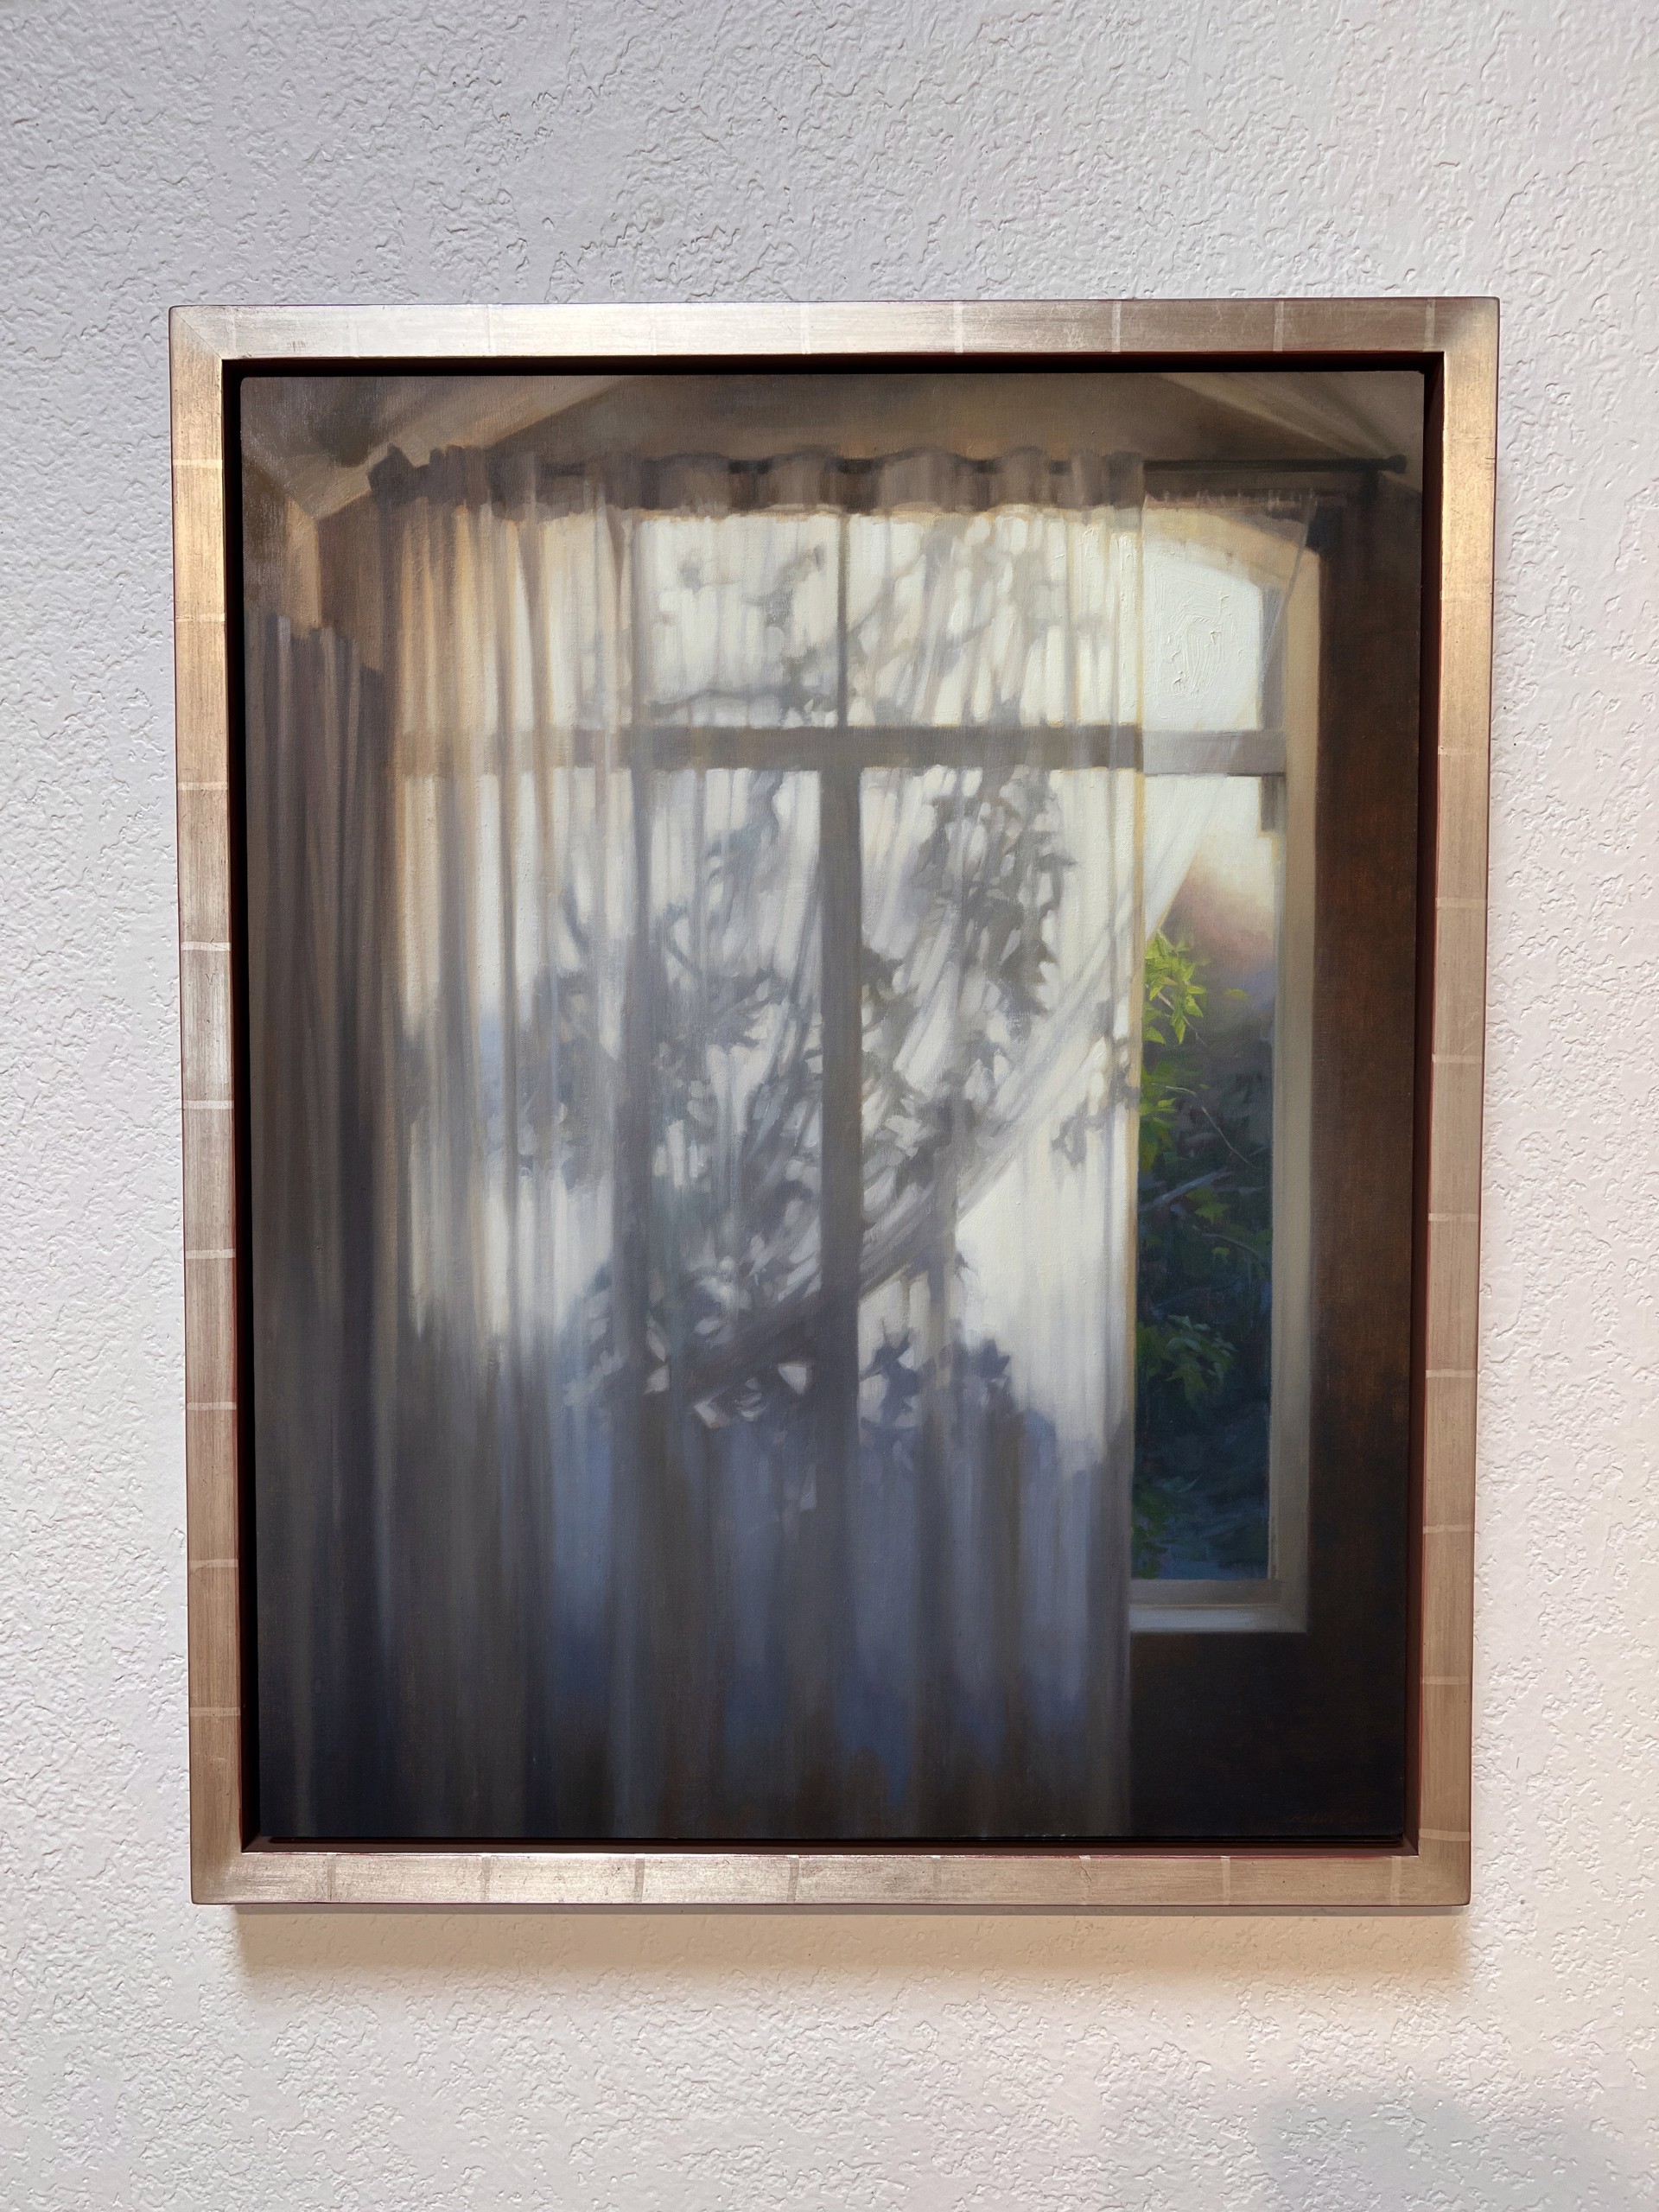 Oil painting "Beginnings" by Robin Cole depicting an interior view through sheer curtains, with trees and foliage visible outside.